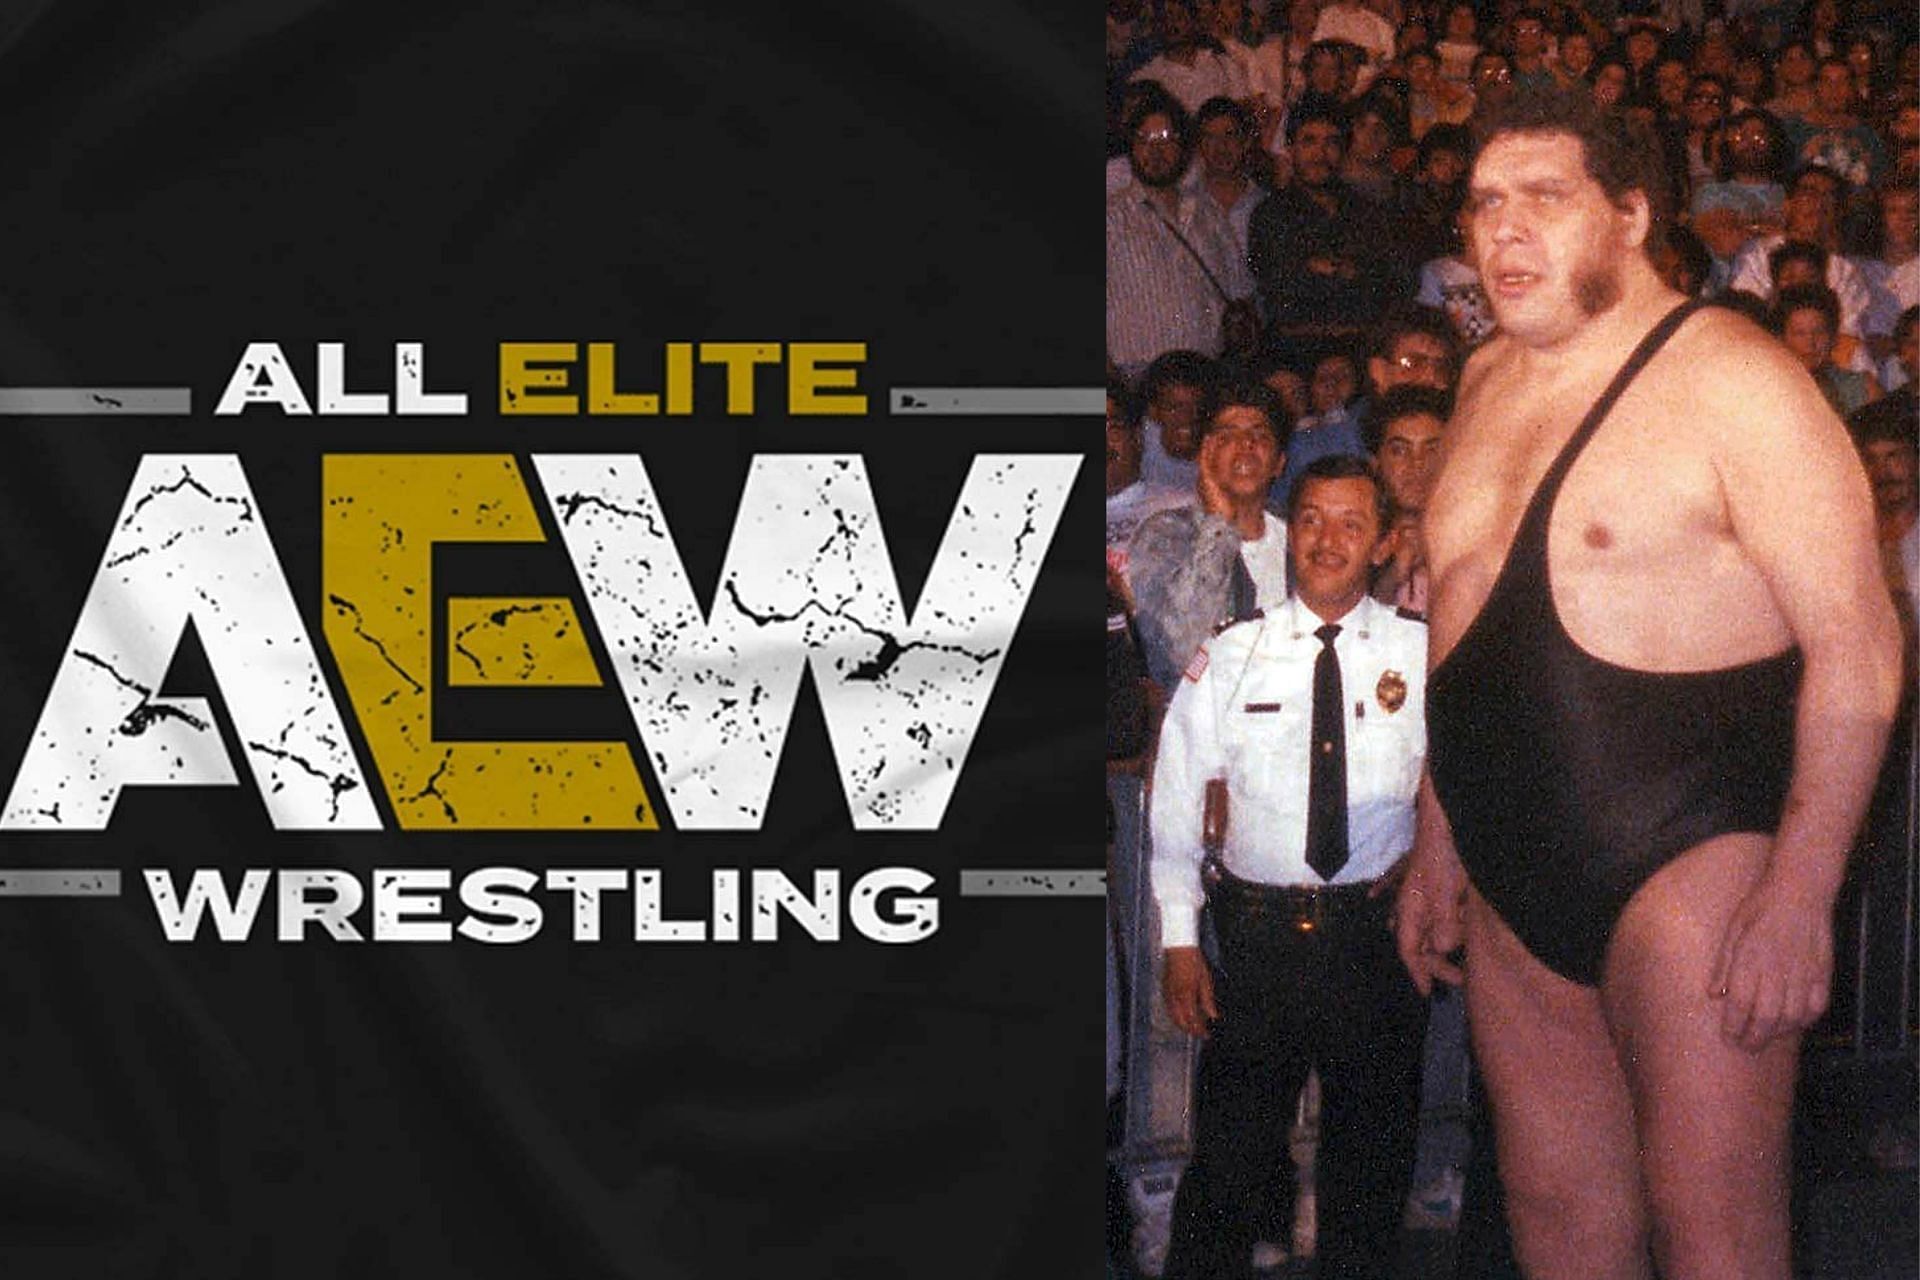 MJF believes he's Andre The Giant